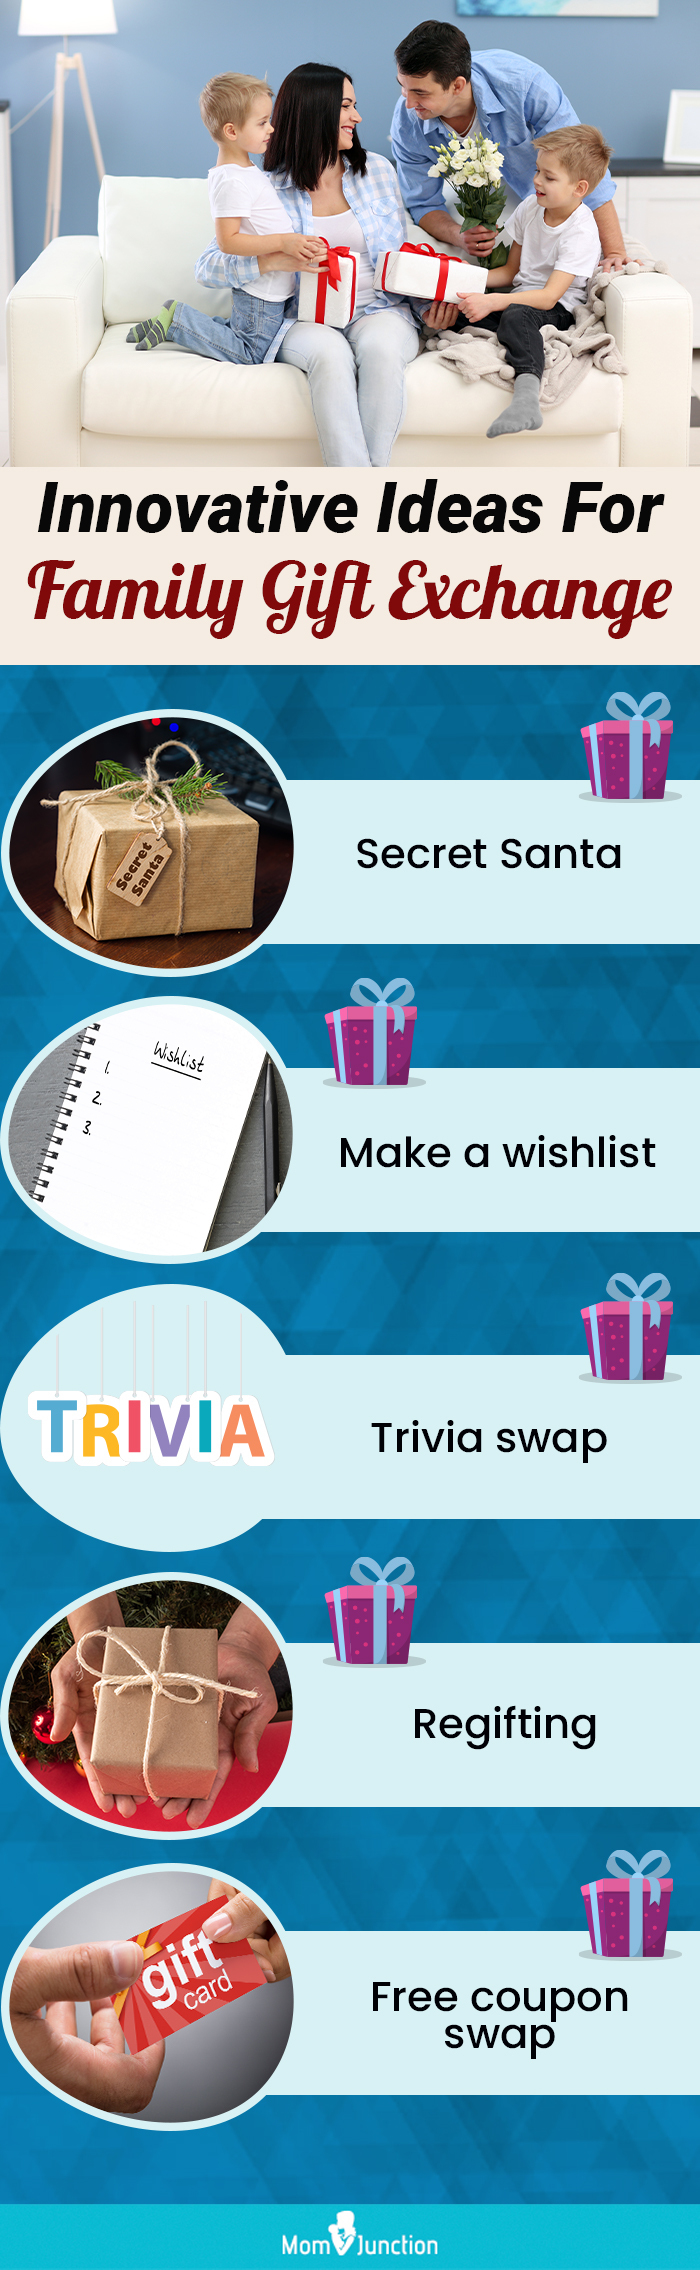 innovative ideas for family gift exchange [infographic]